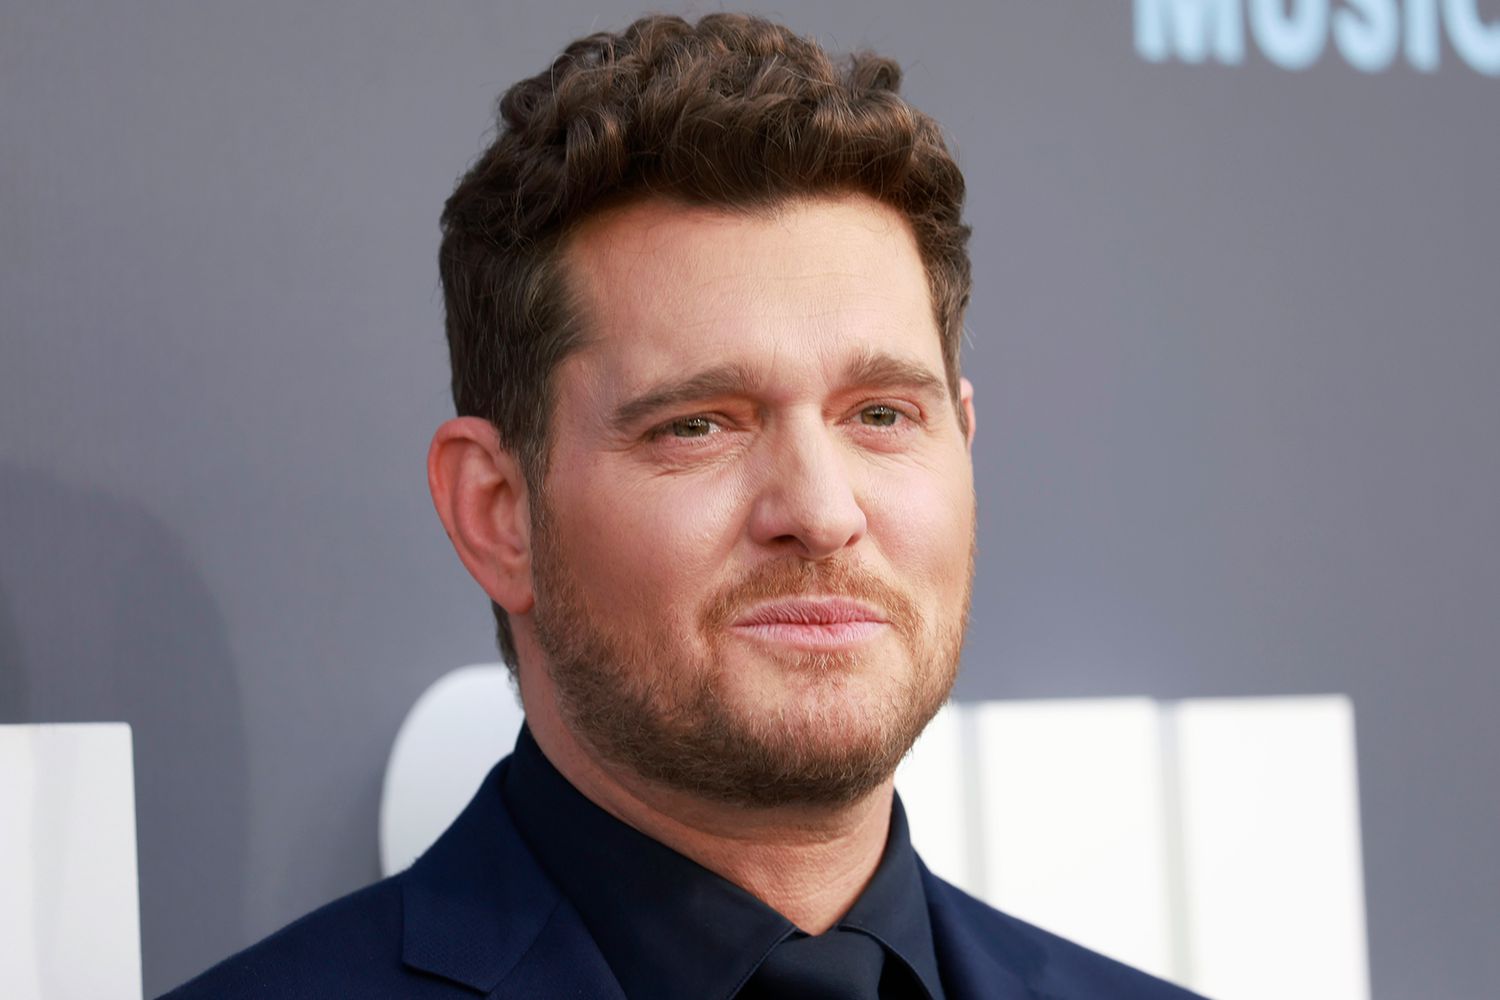 Michael Bublé’s Wild Claim At NHL Press Conference